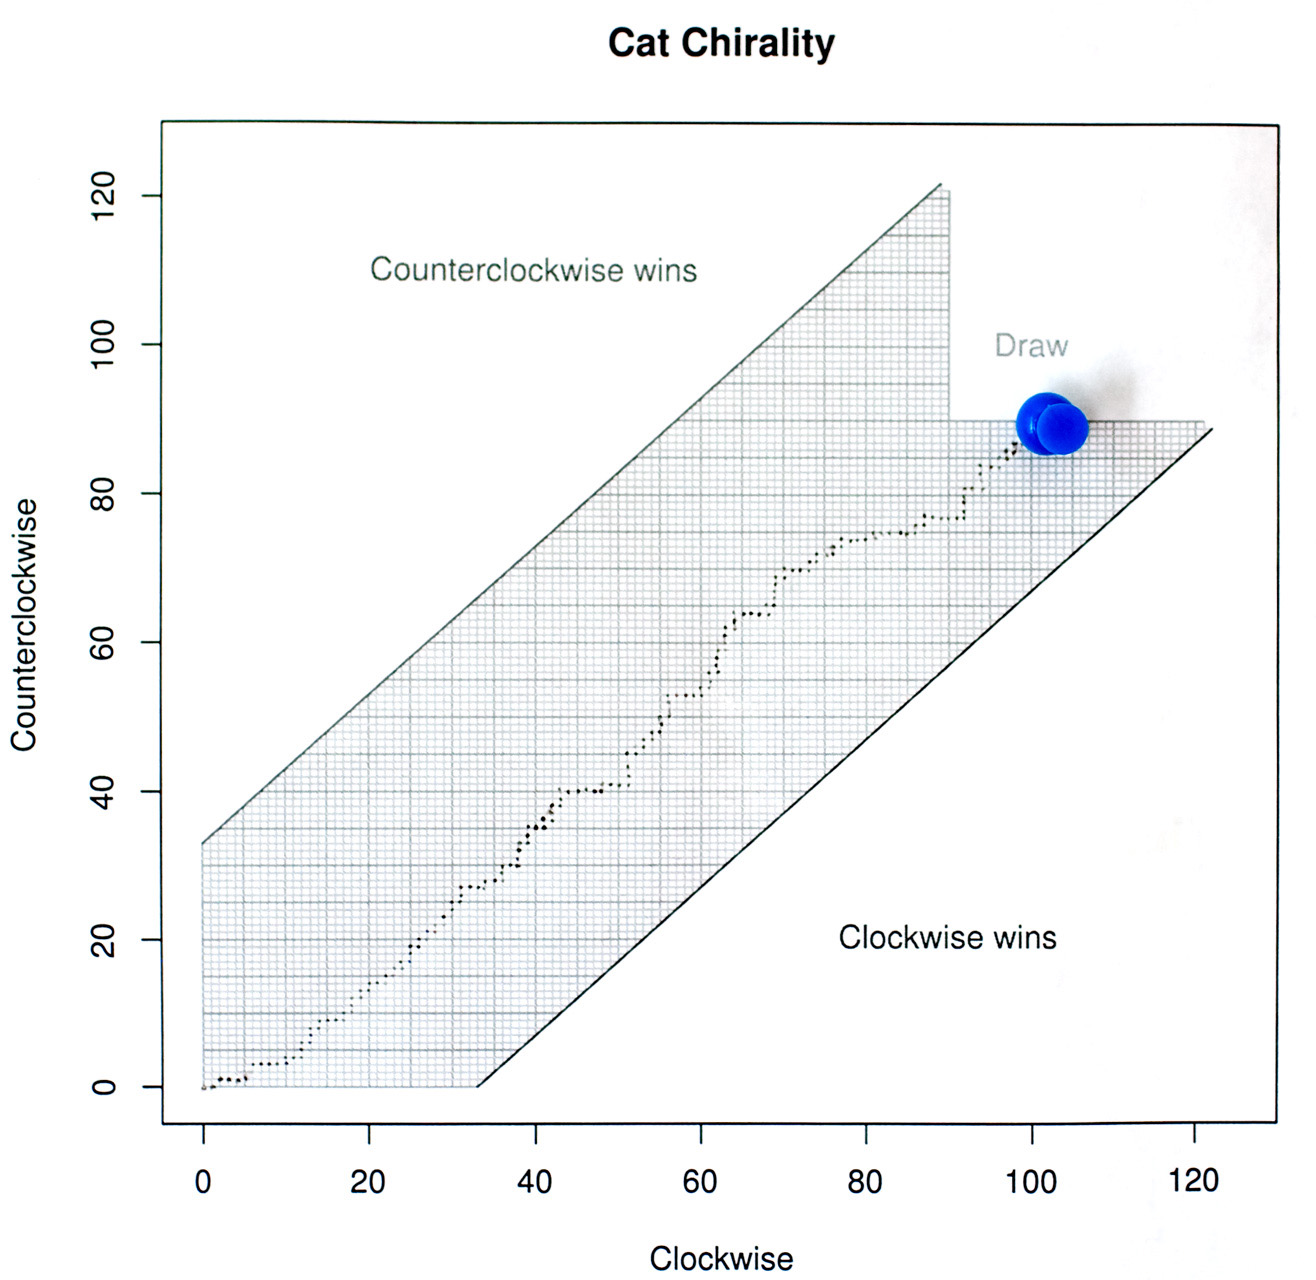 Cat chirality results